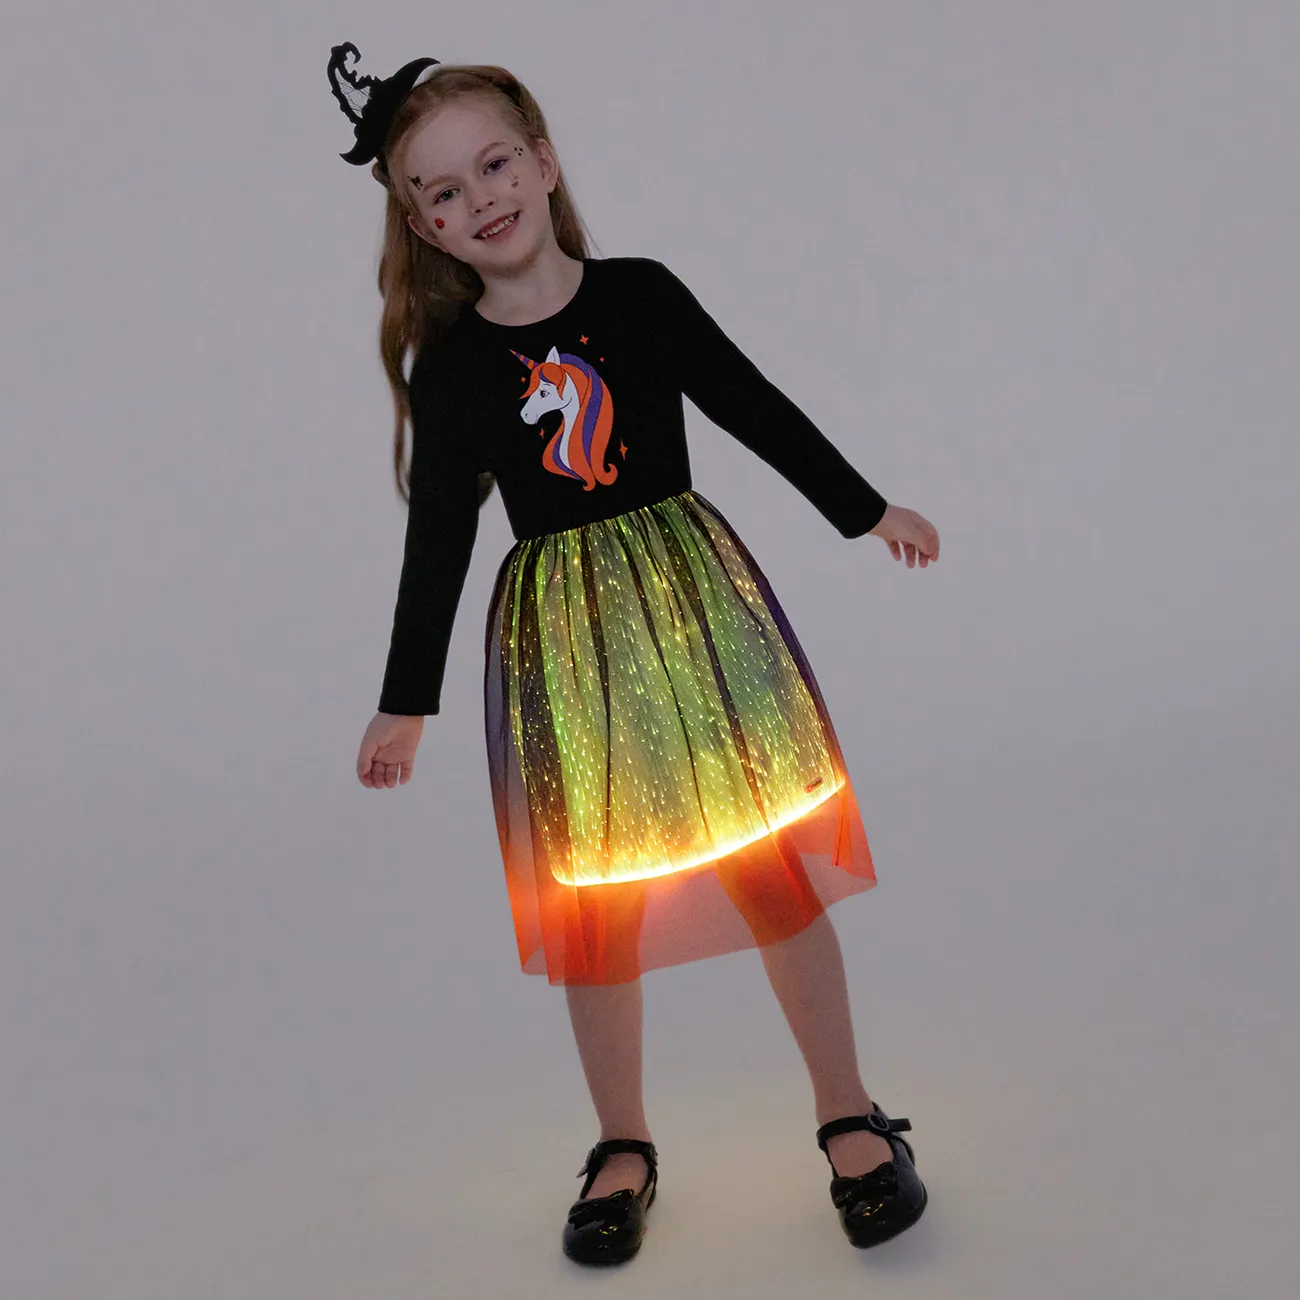 Go-Glow Illuminating Kid Unicorn Dress with Light Up Skirt Including Controller (Built-In Battery) Black big image 1